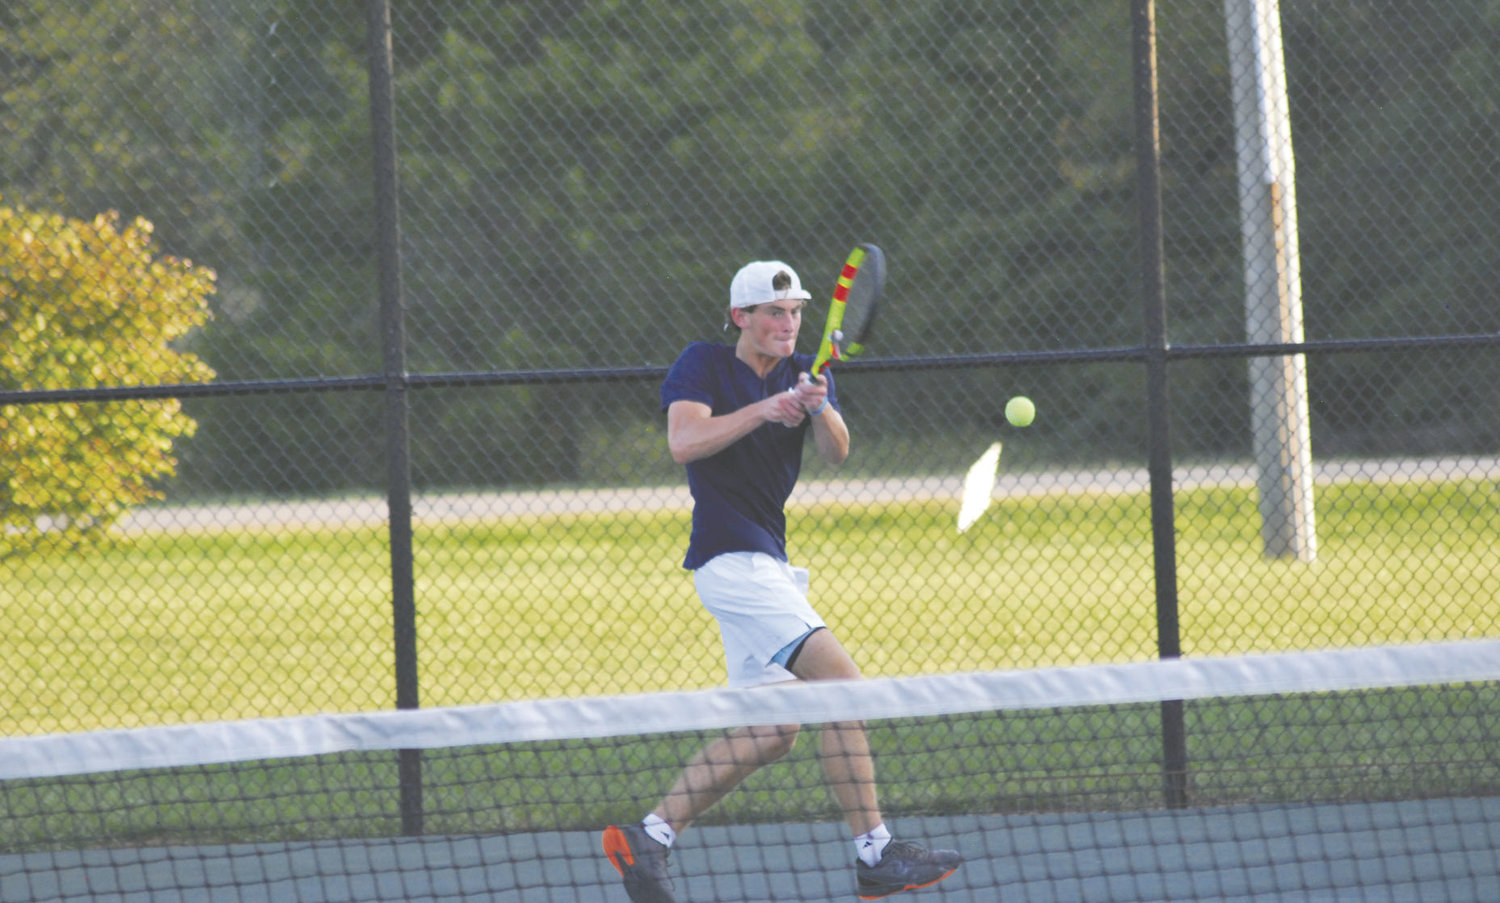 Fountain Central's Carson Eberly came from behind to beat Covington's Calvin Springer 6-2, 4-6, 7-6(3) to win the Wabash River Conference single's title on Monday night.